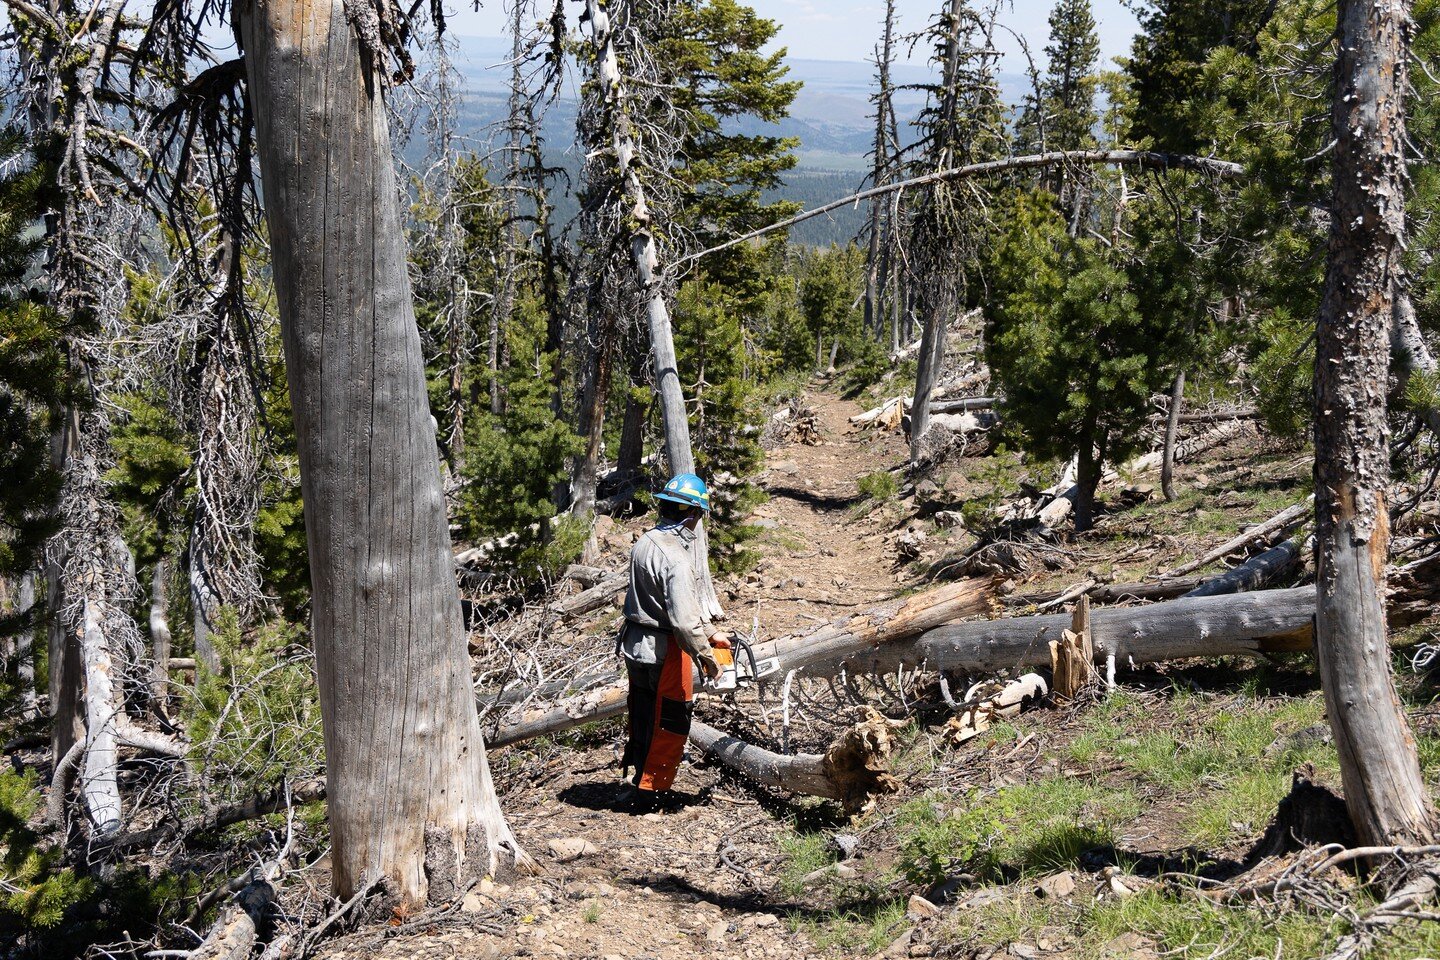 Thom Batty, the owner of Tall Town Bike and Camp in Lakeview, Oregon, has been receiving rider feedback about the Oregon Timber Trail for the past six years. One common complaint has always stood out: the excessive amount of blowdowns on Crane Mounta